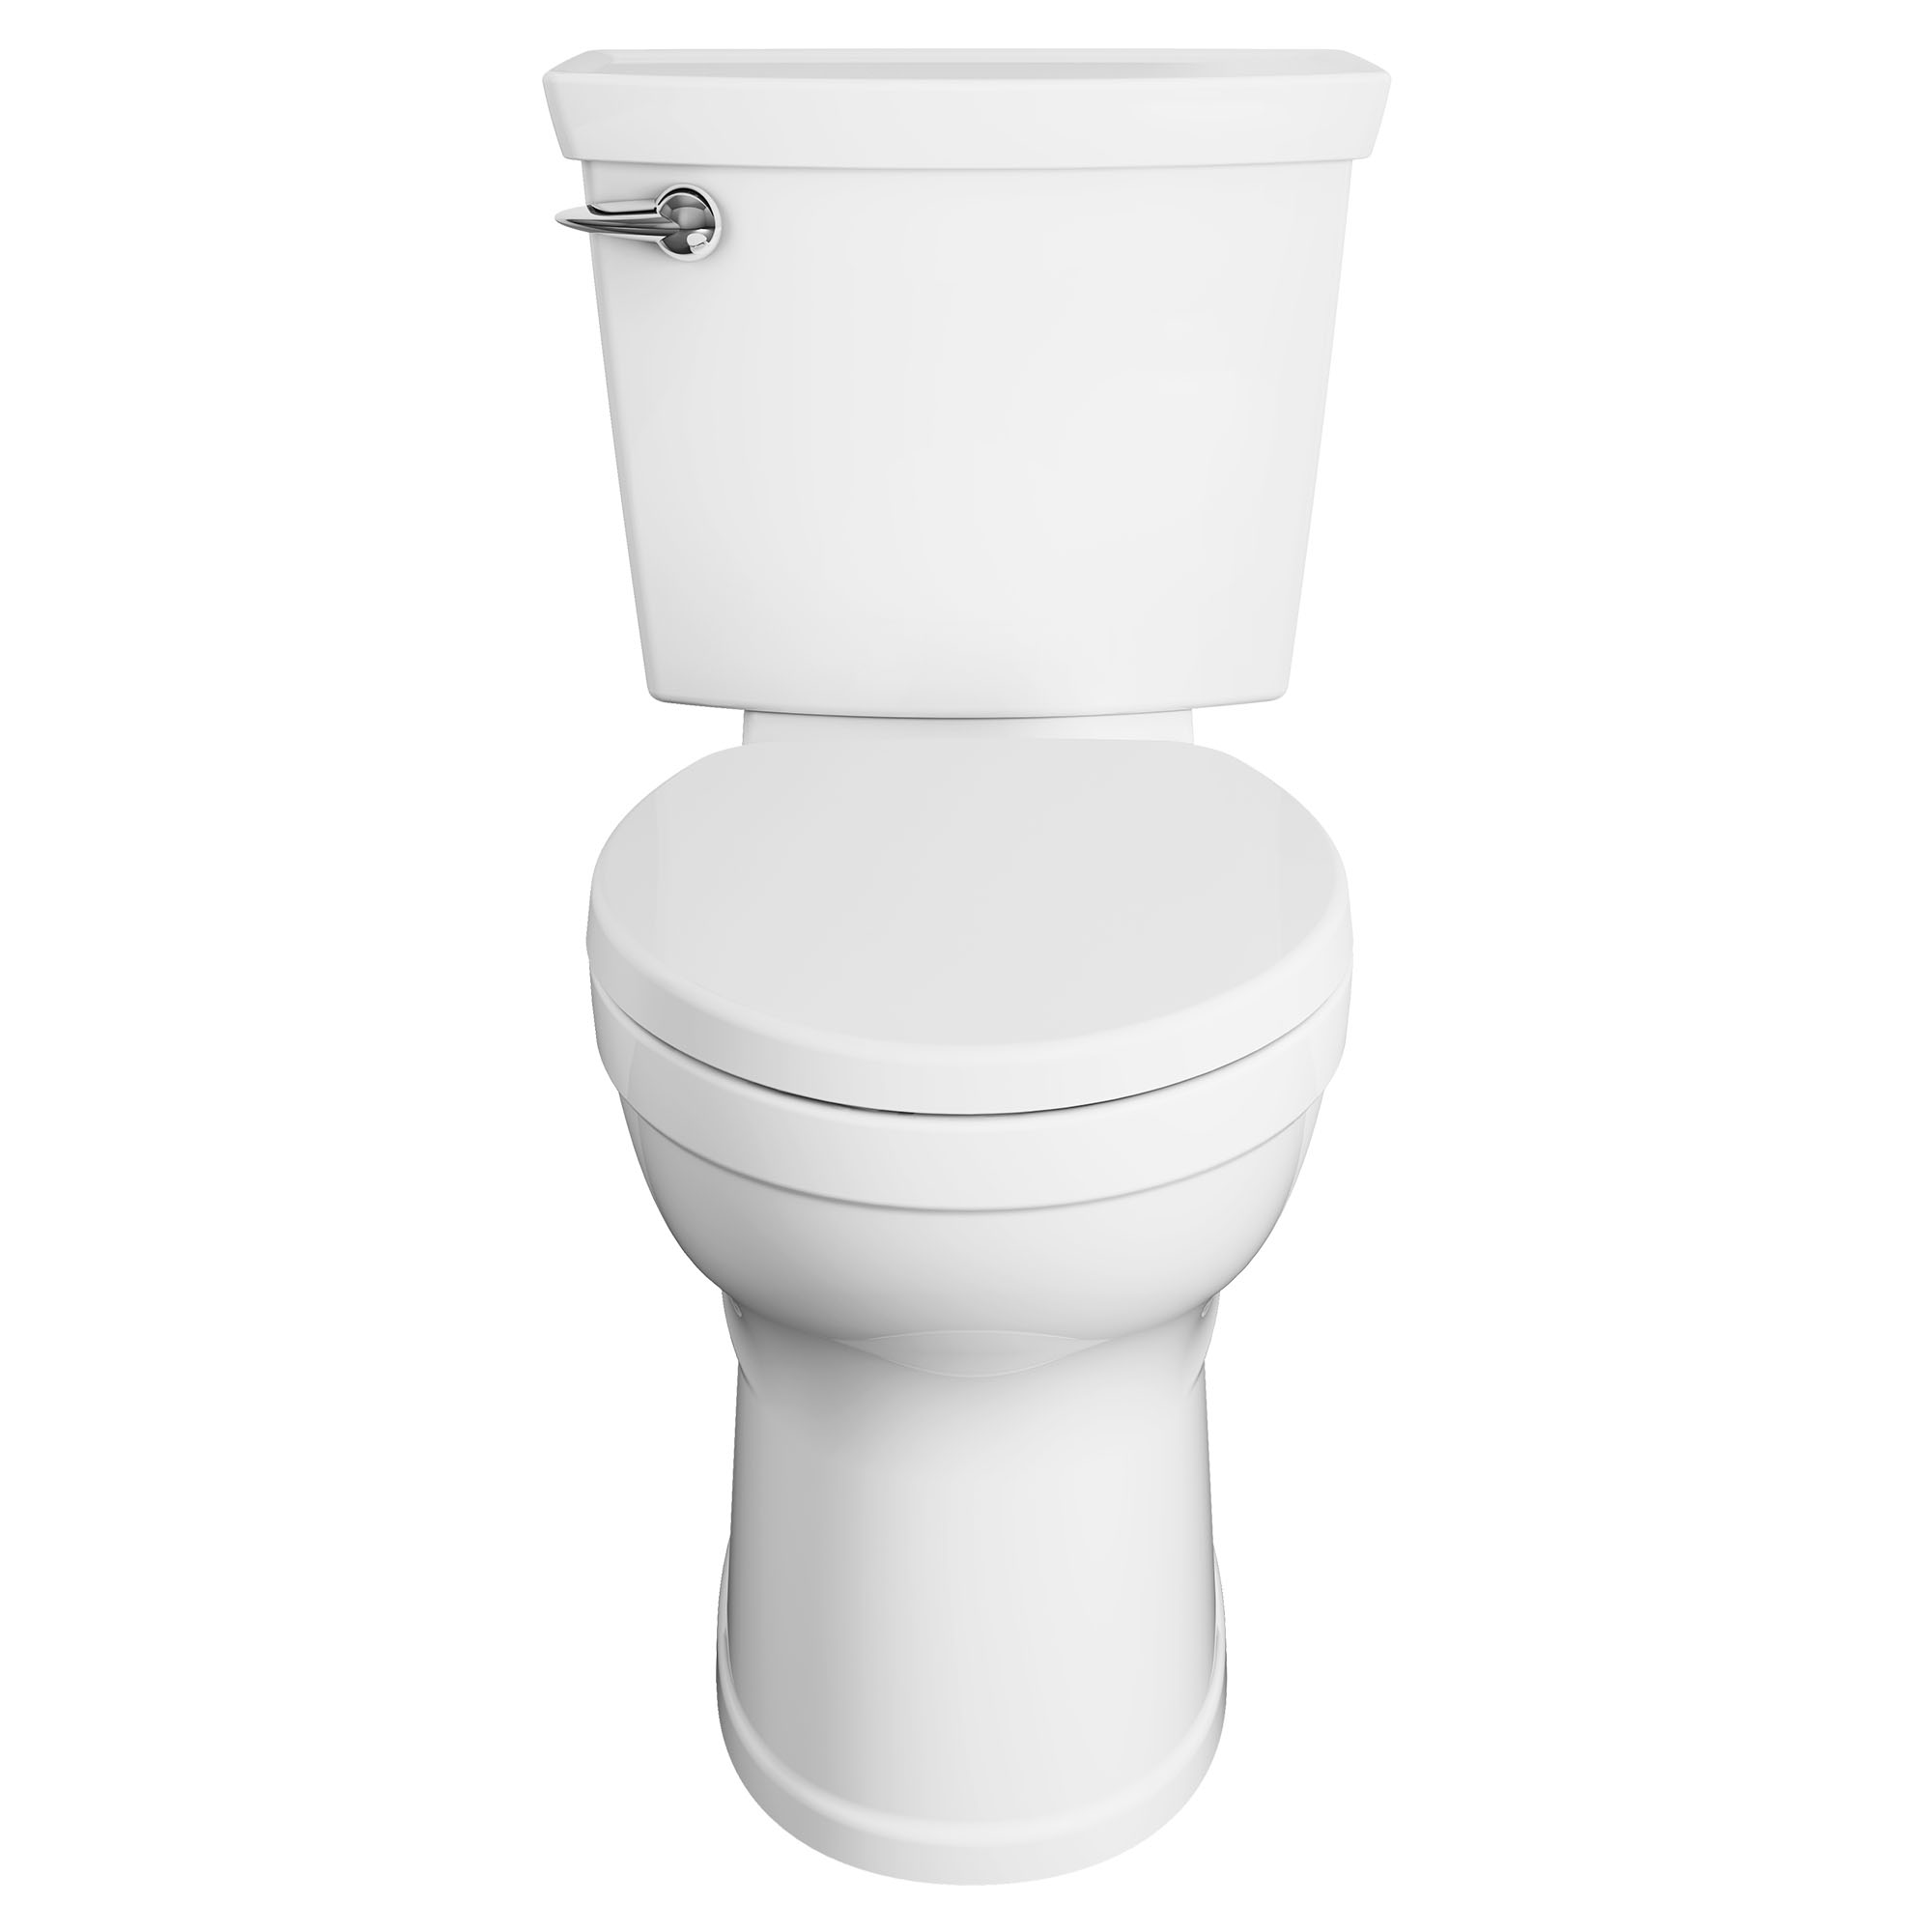 Champion 4 MAX 1.28 GPF/4.8 LPF Left Trip Lever 16-1/2-in. Elongated-Front Toilet